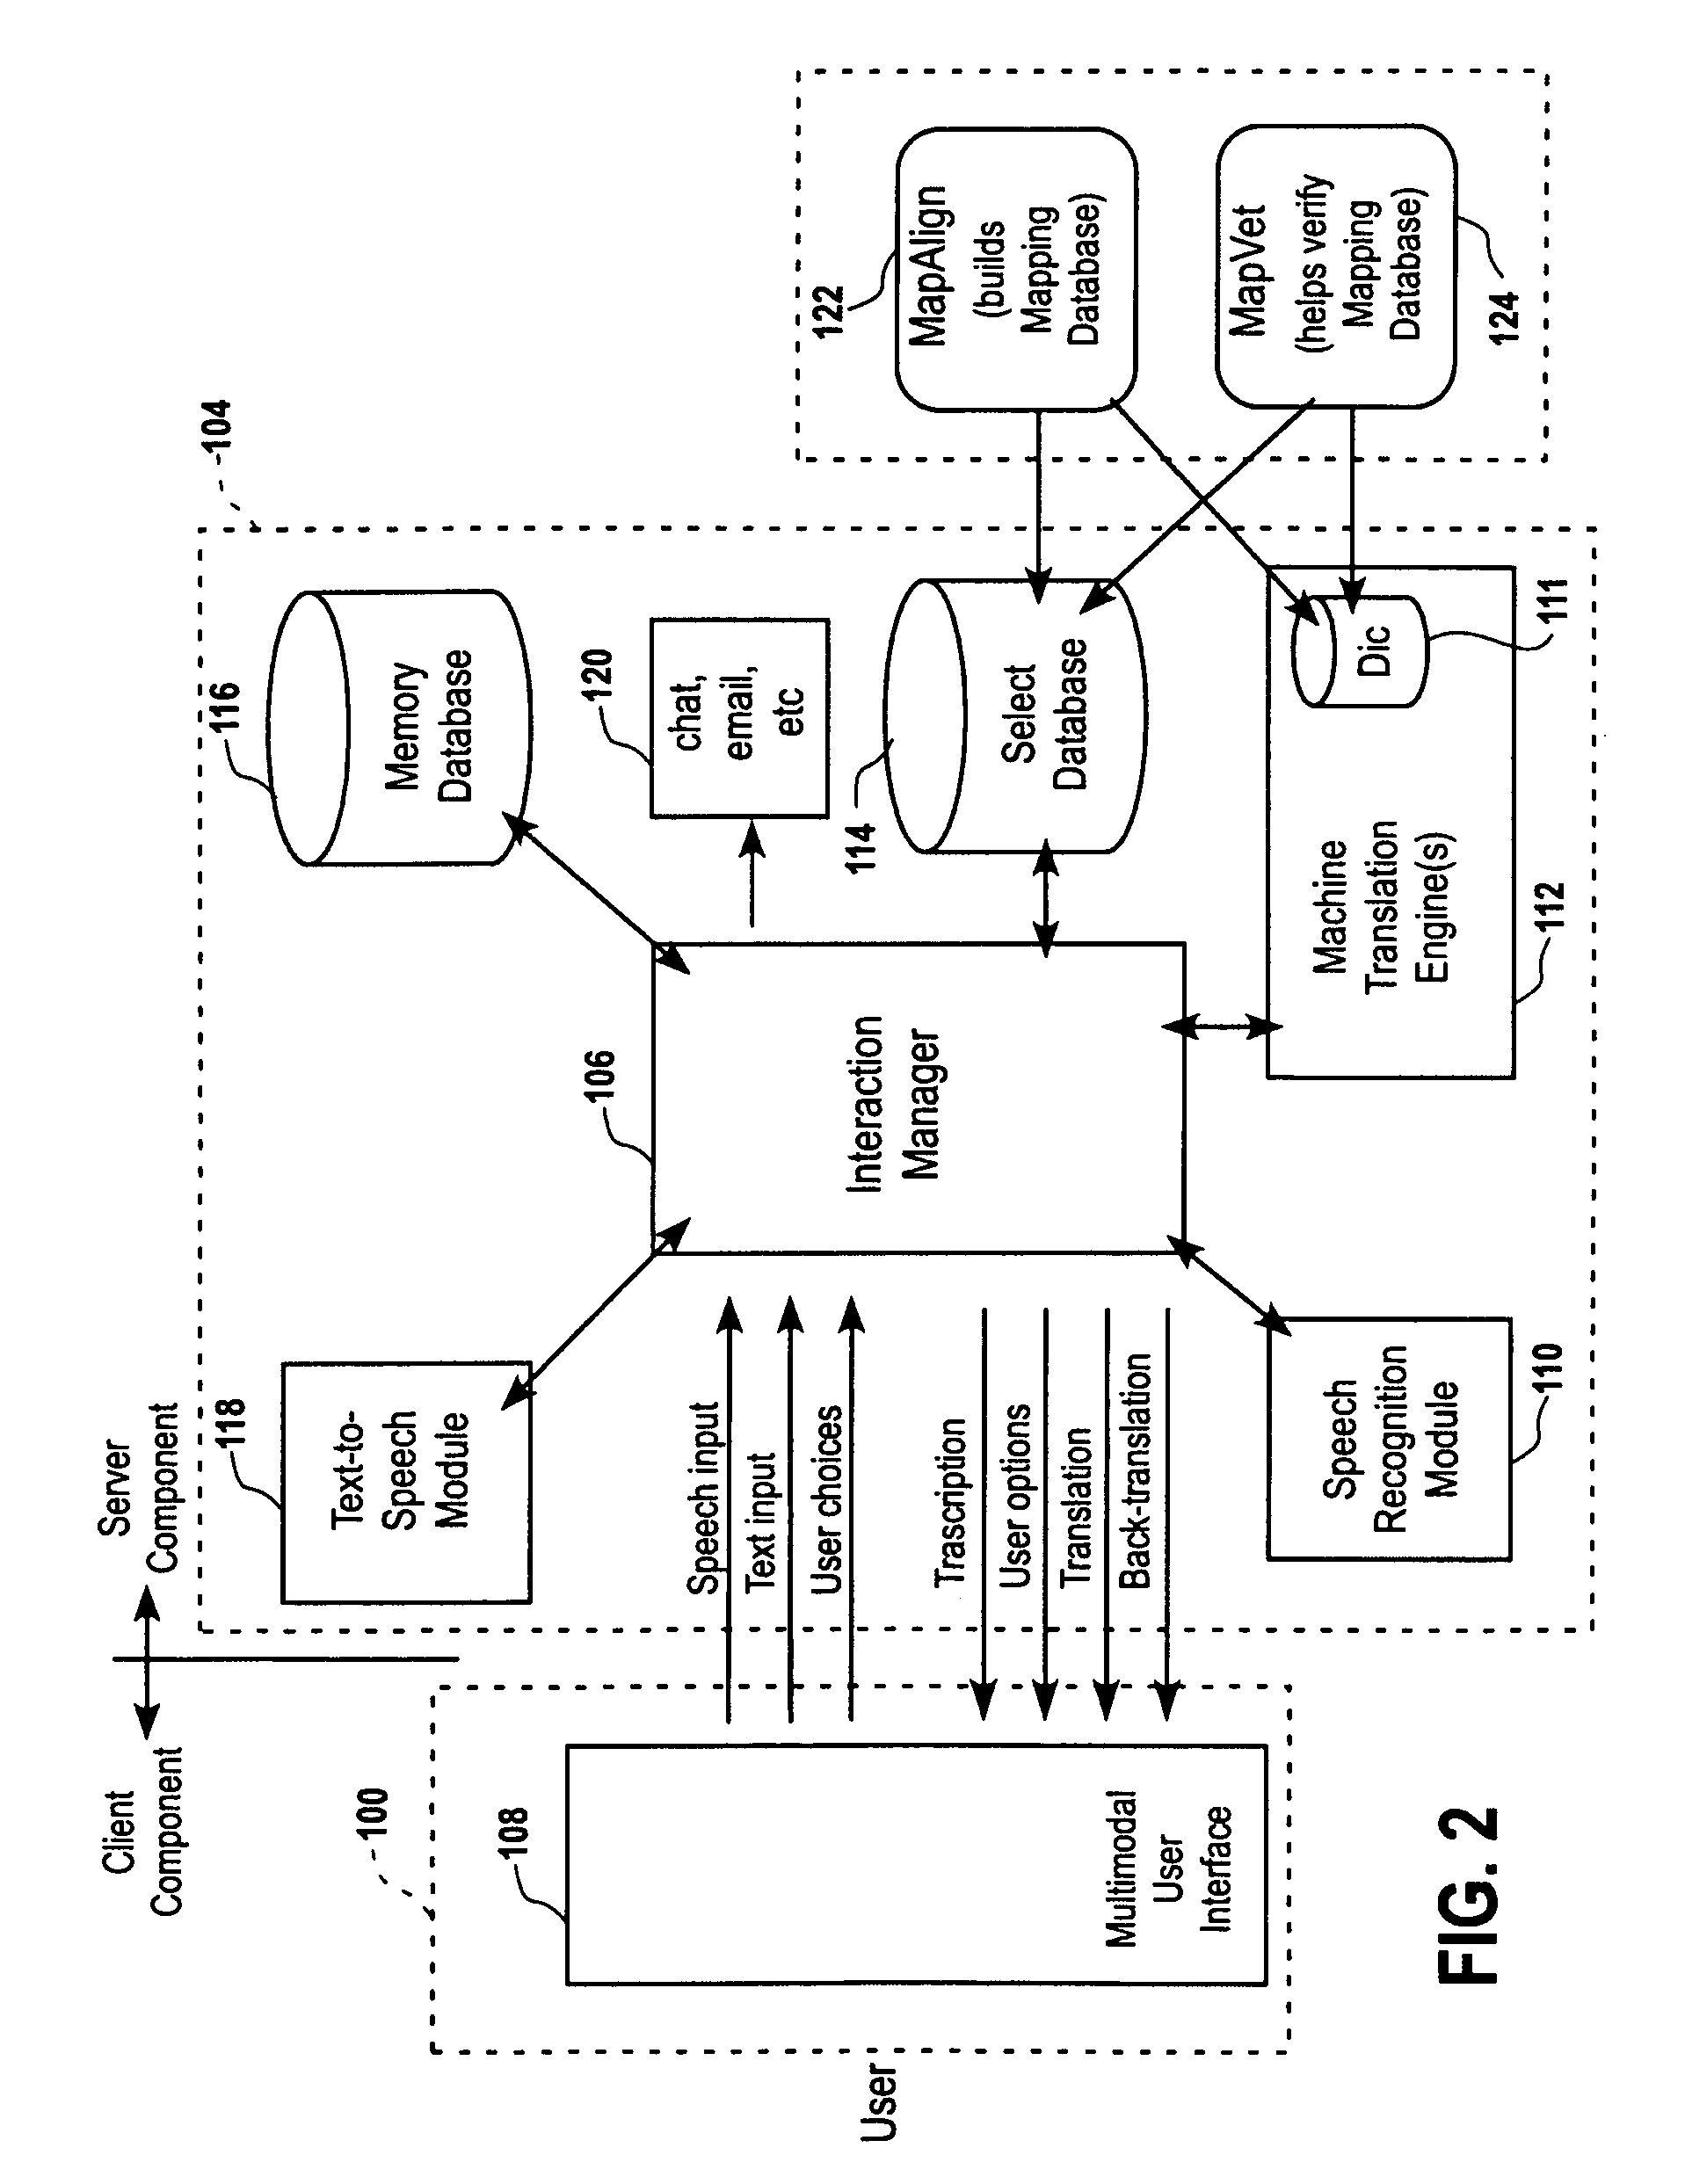 Speech-enabled language translation system and method enabling interactive user supervision of translation and speech recognition accuracy